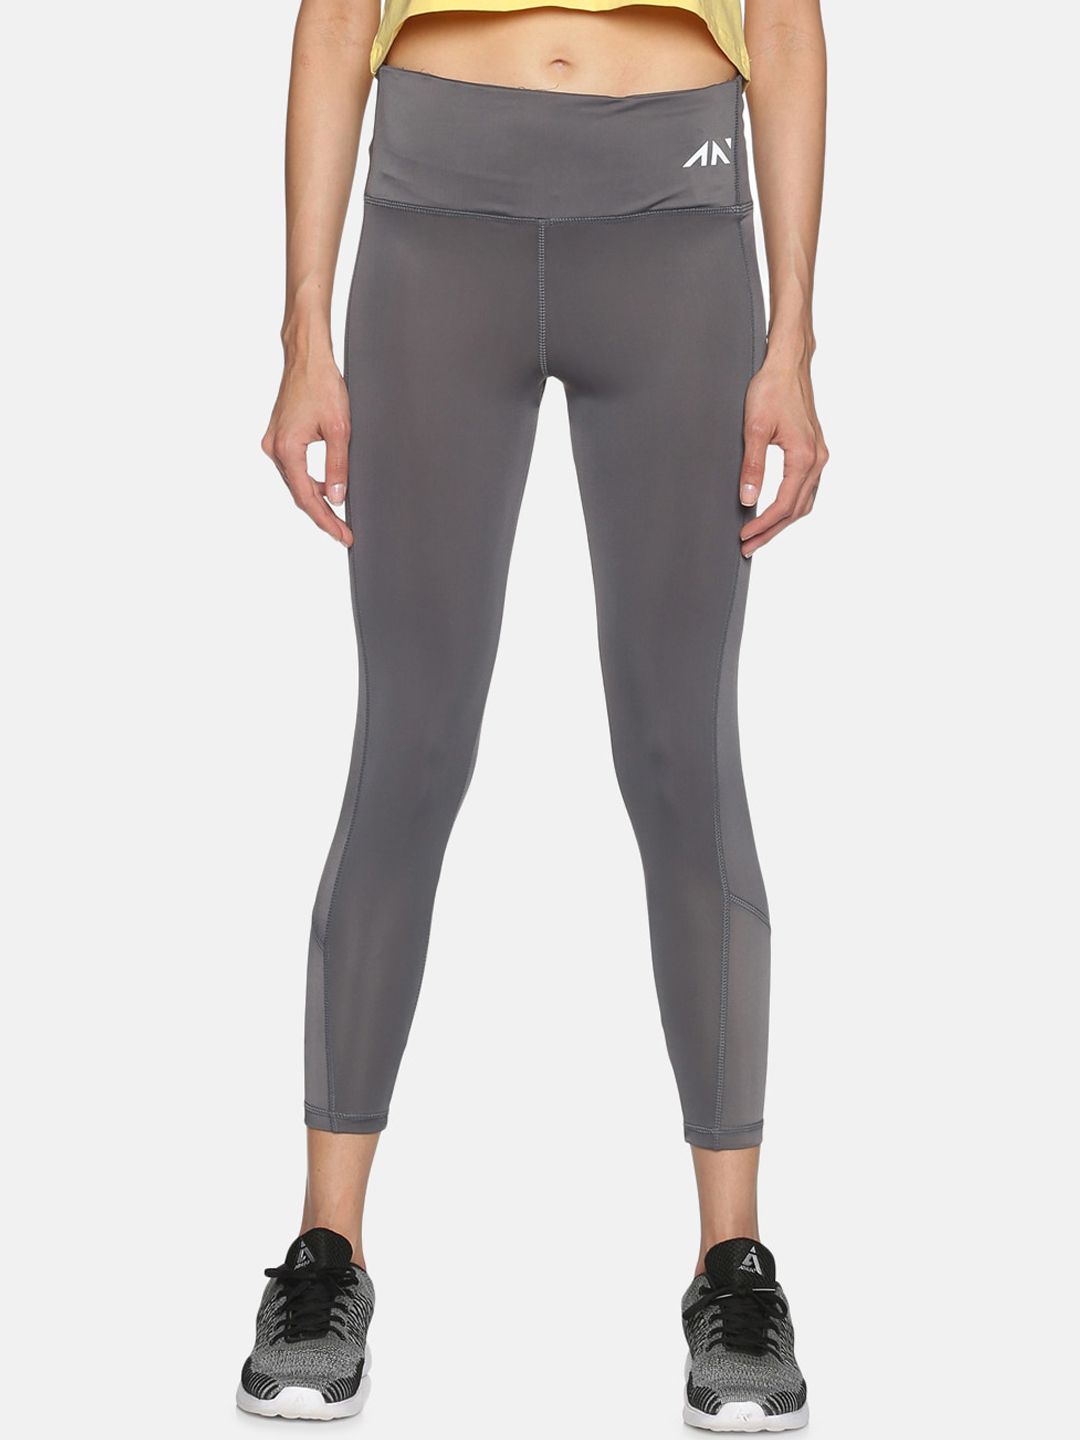 AESTHETIC NATION Woman Grey Supple Performance Leggings Price in India